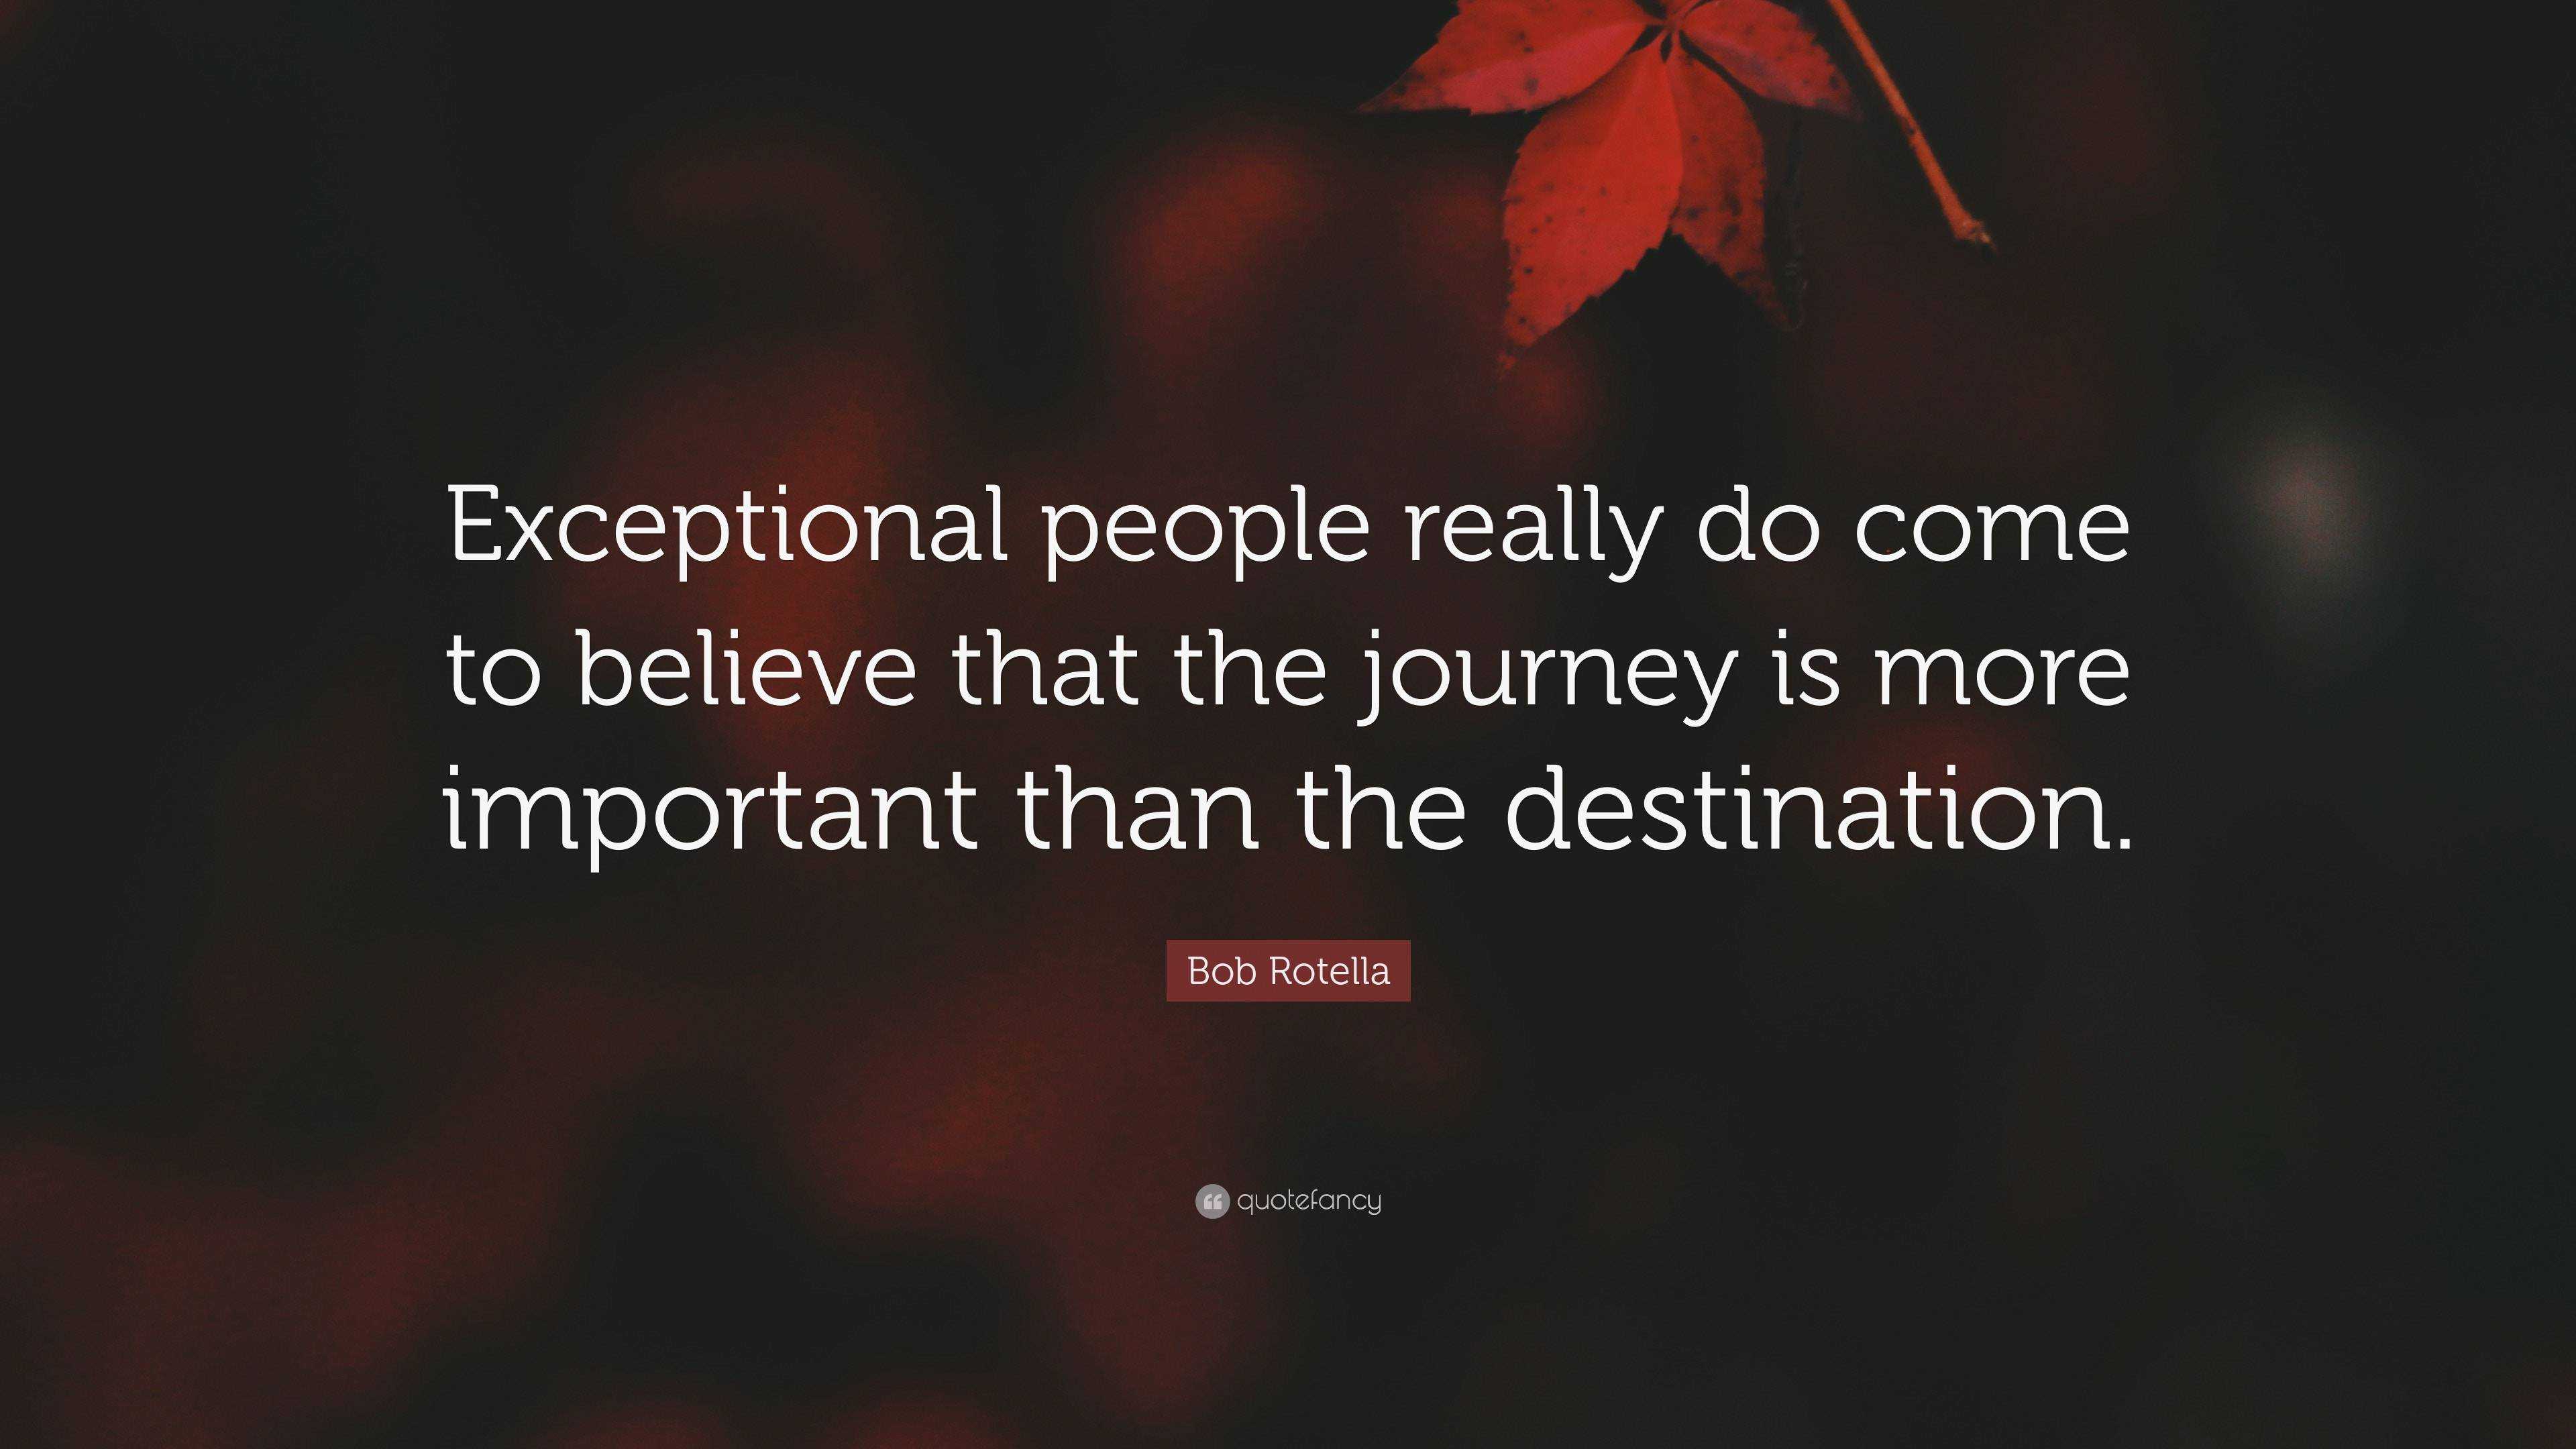 Bob Rotella Quote: “Exceptional people really do come to believe that ...